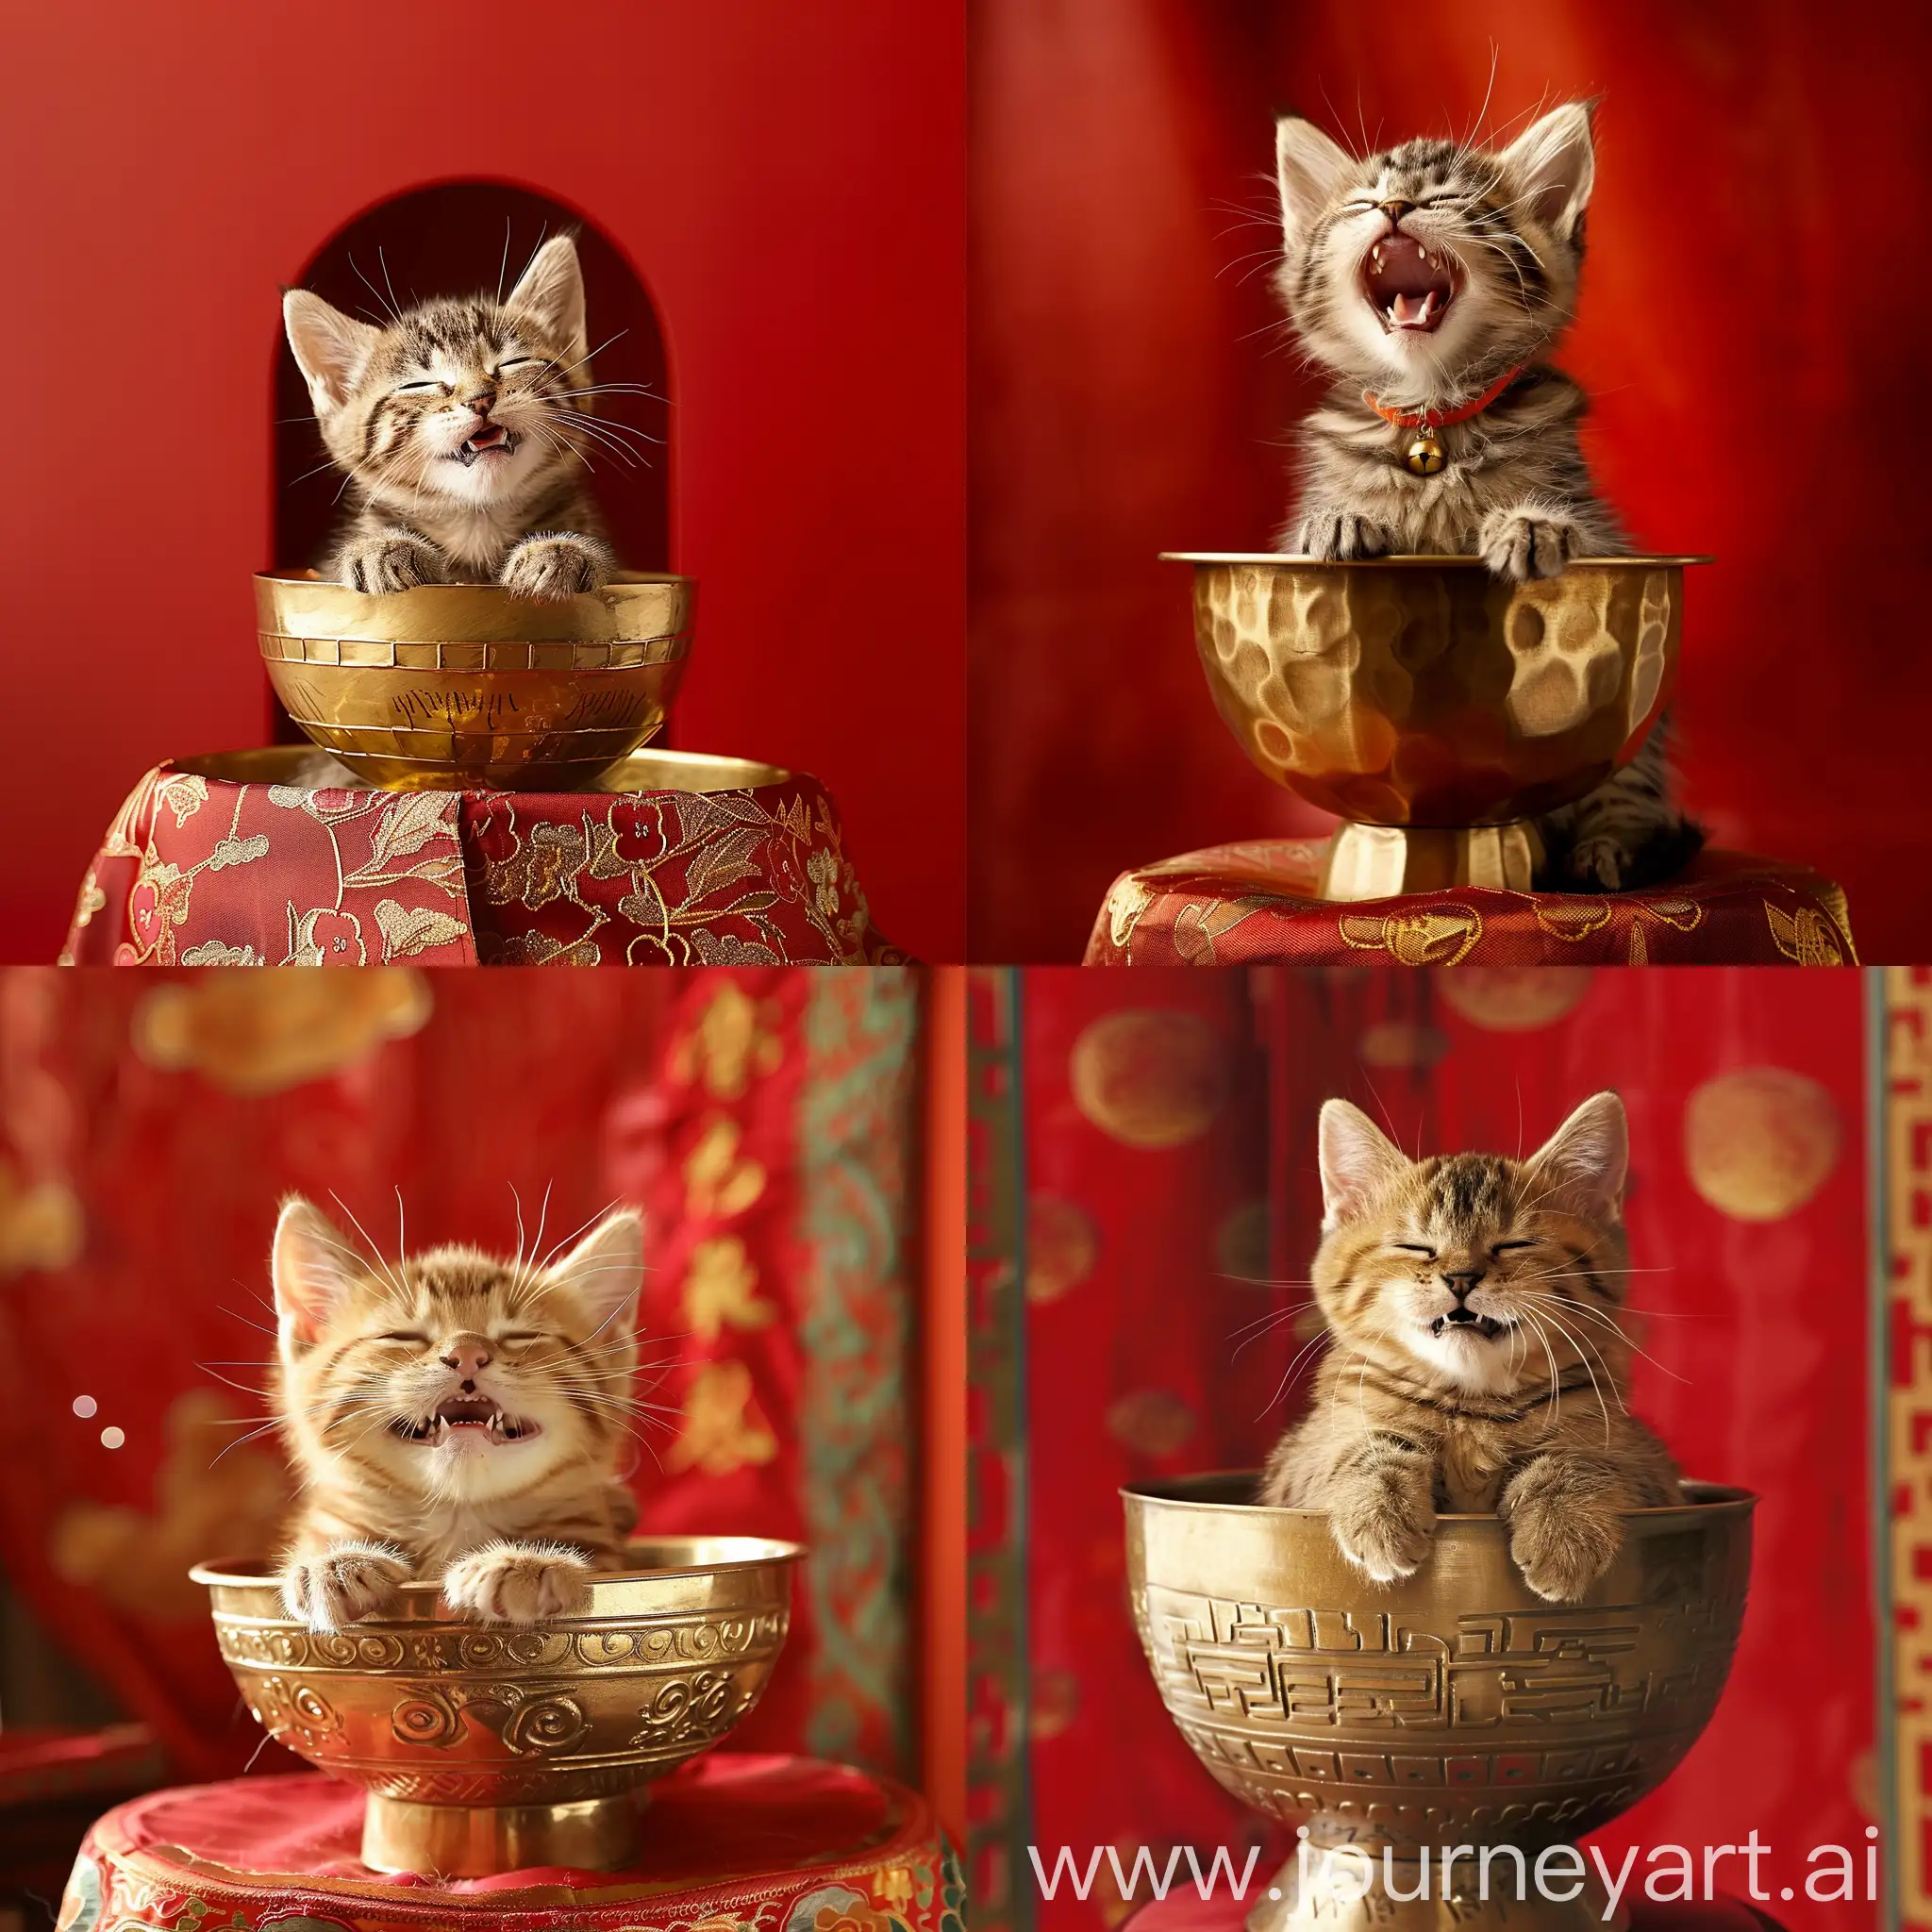 A anime cute Chinese lucky cat sit in gold bowl picture ,Chinese red background,laugh,smiling,